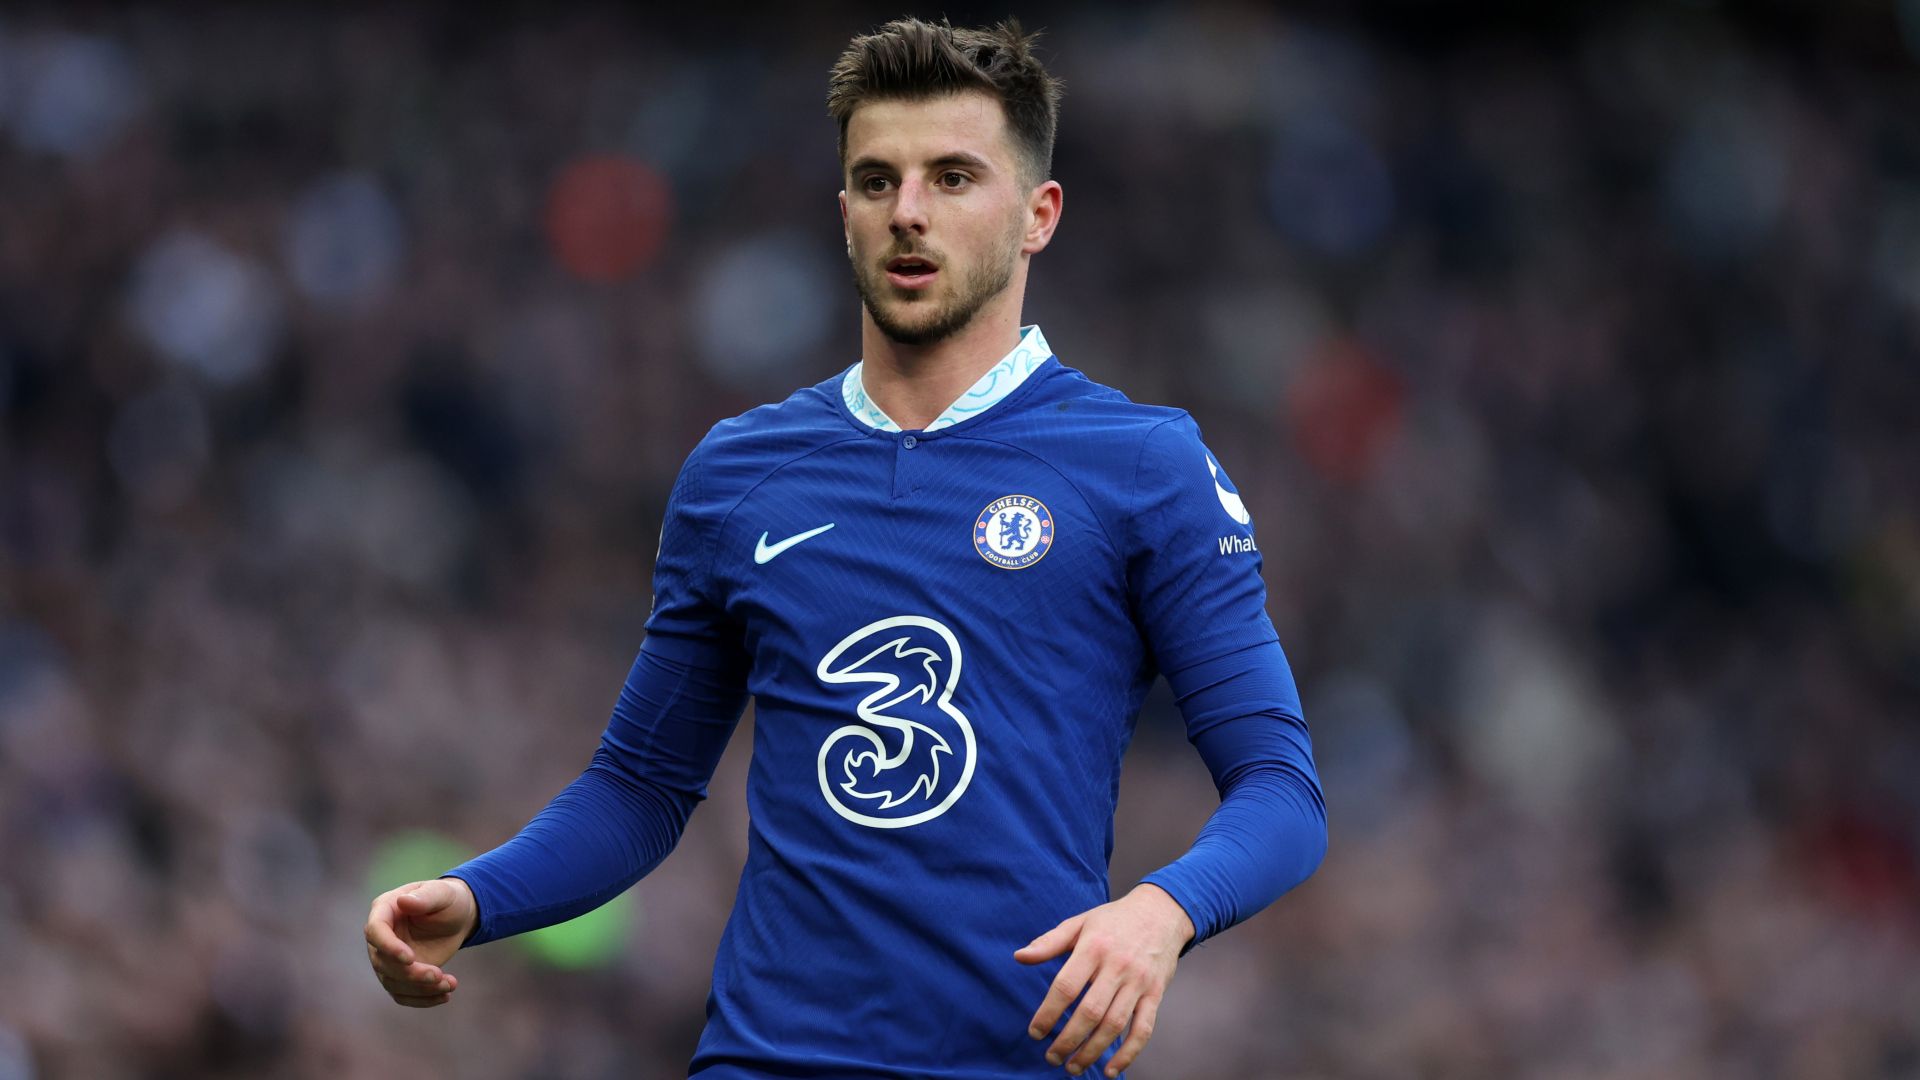 Chelsea star Mason Mount heads to new boss Todd Boehly's LA